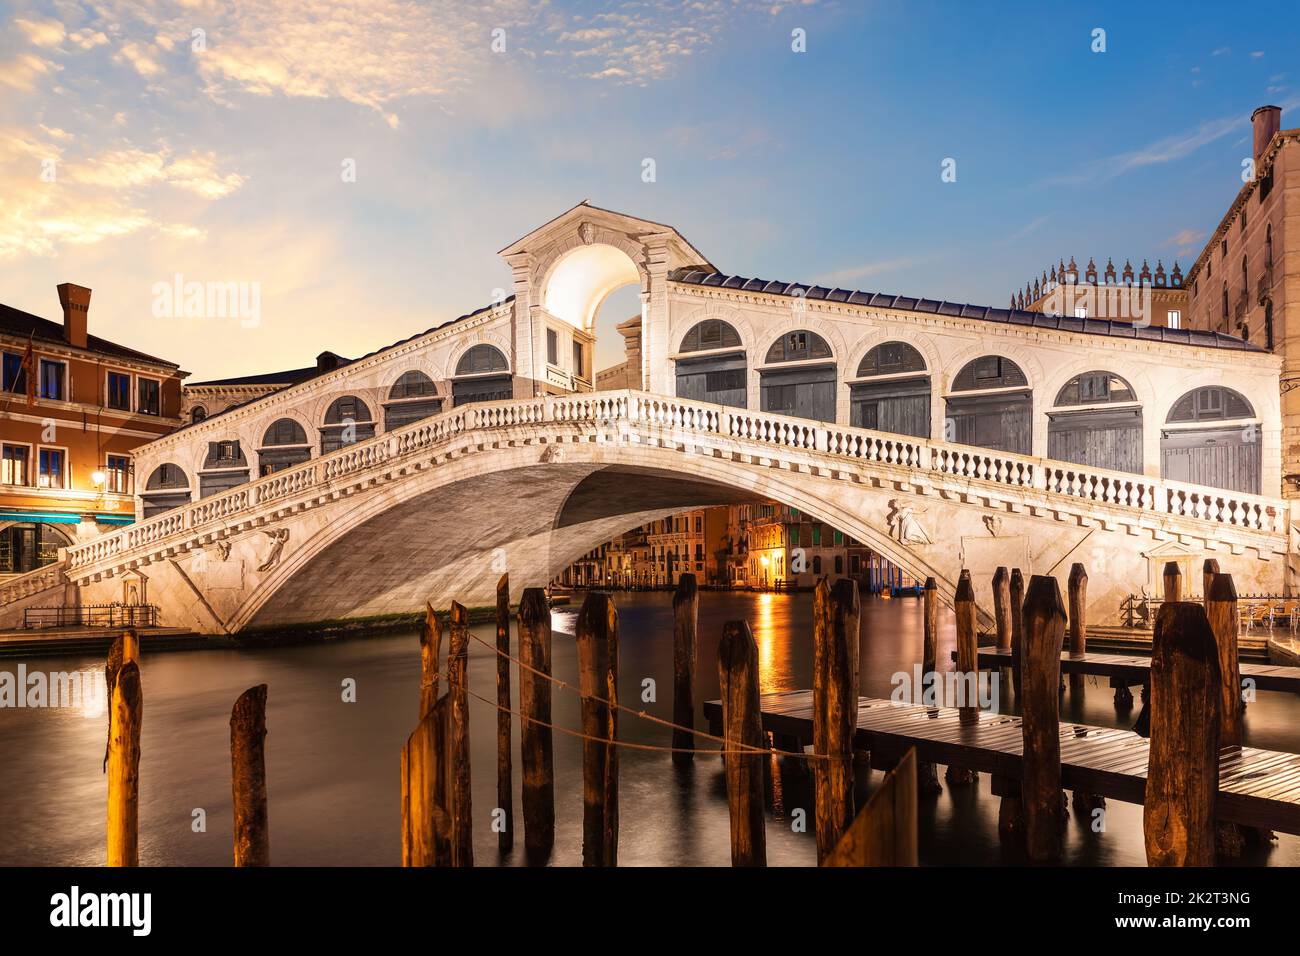 The Rialto Bridge at sunrise, one of the most visited sights of Venice, Italy Stock Photo